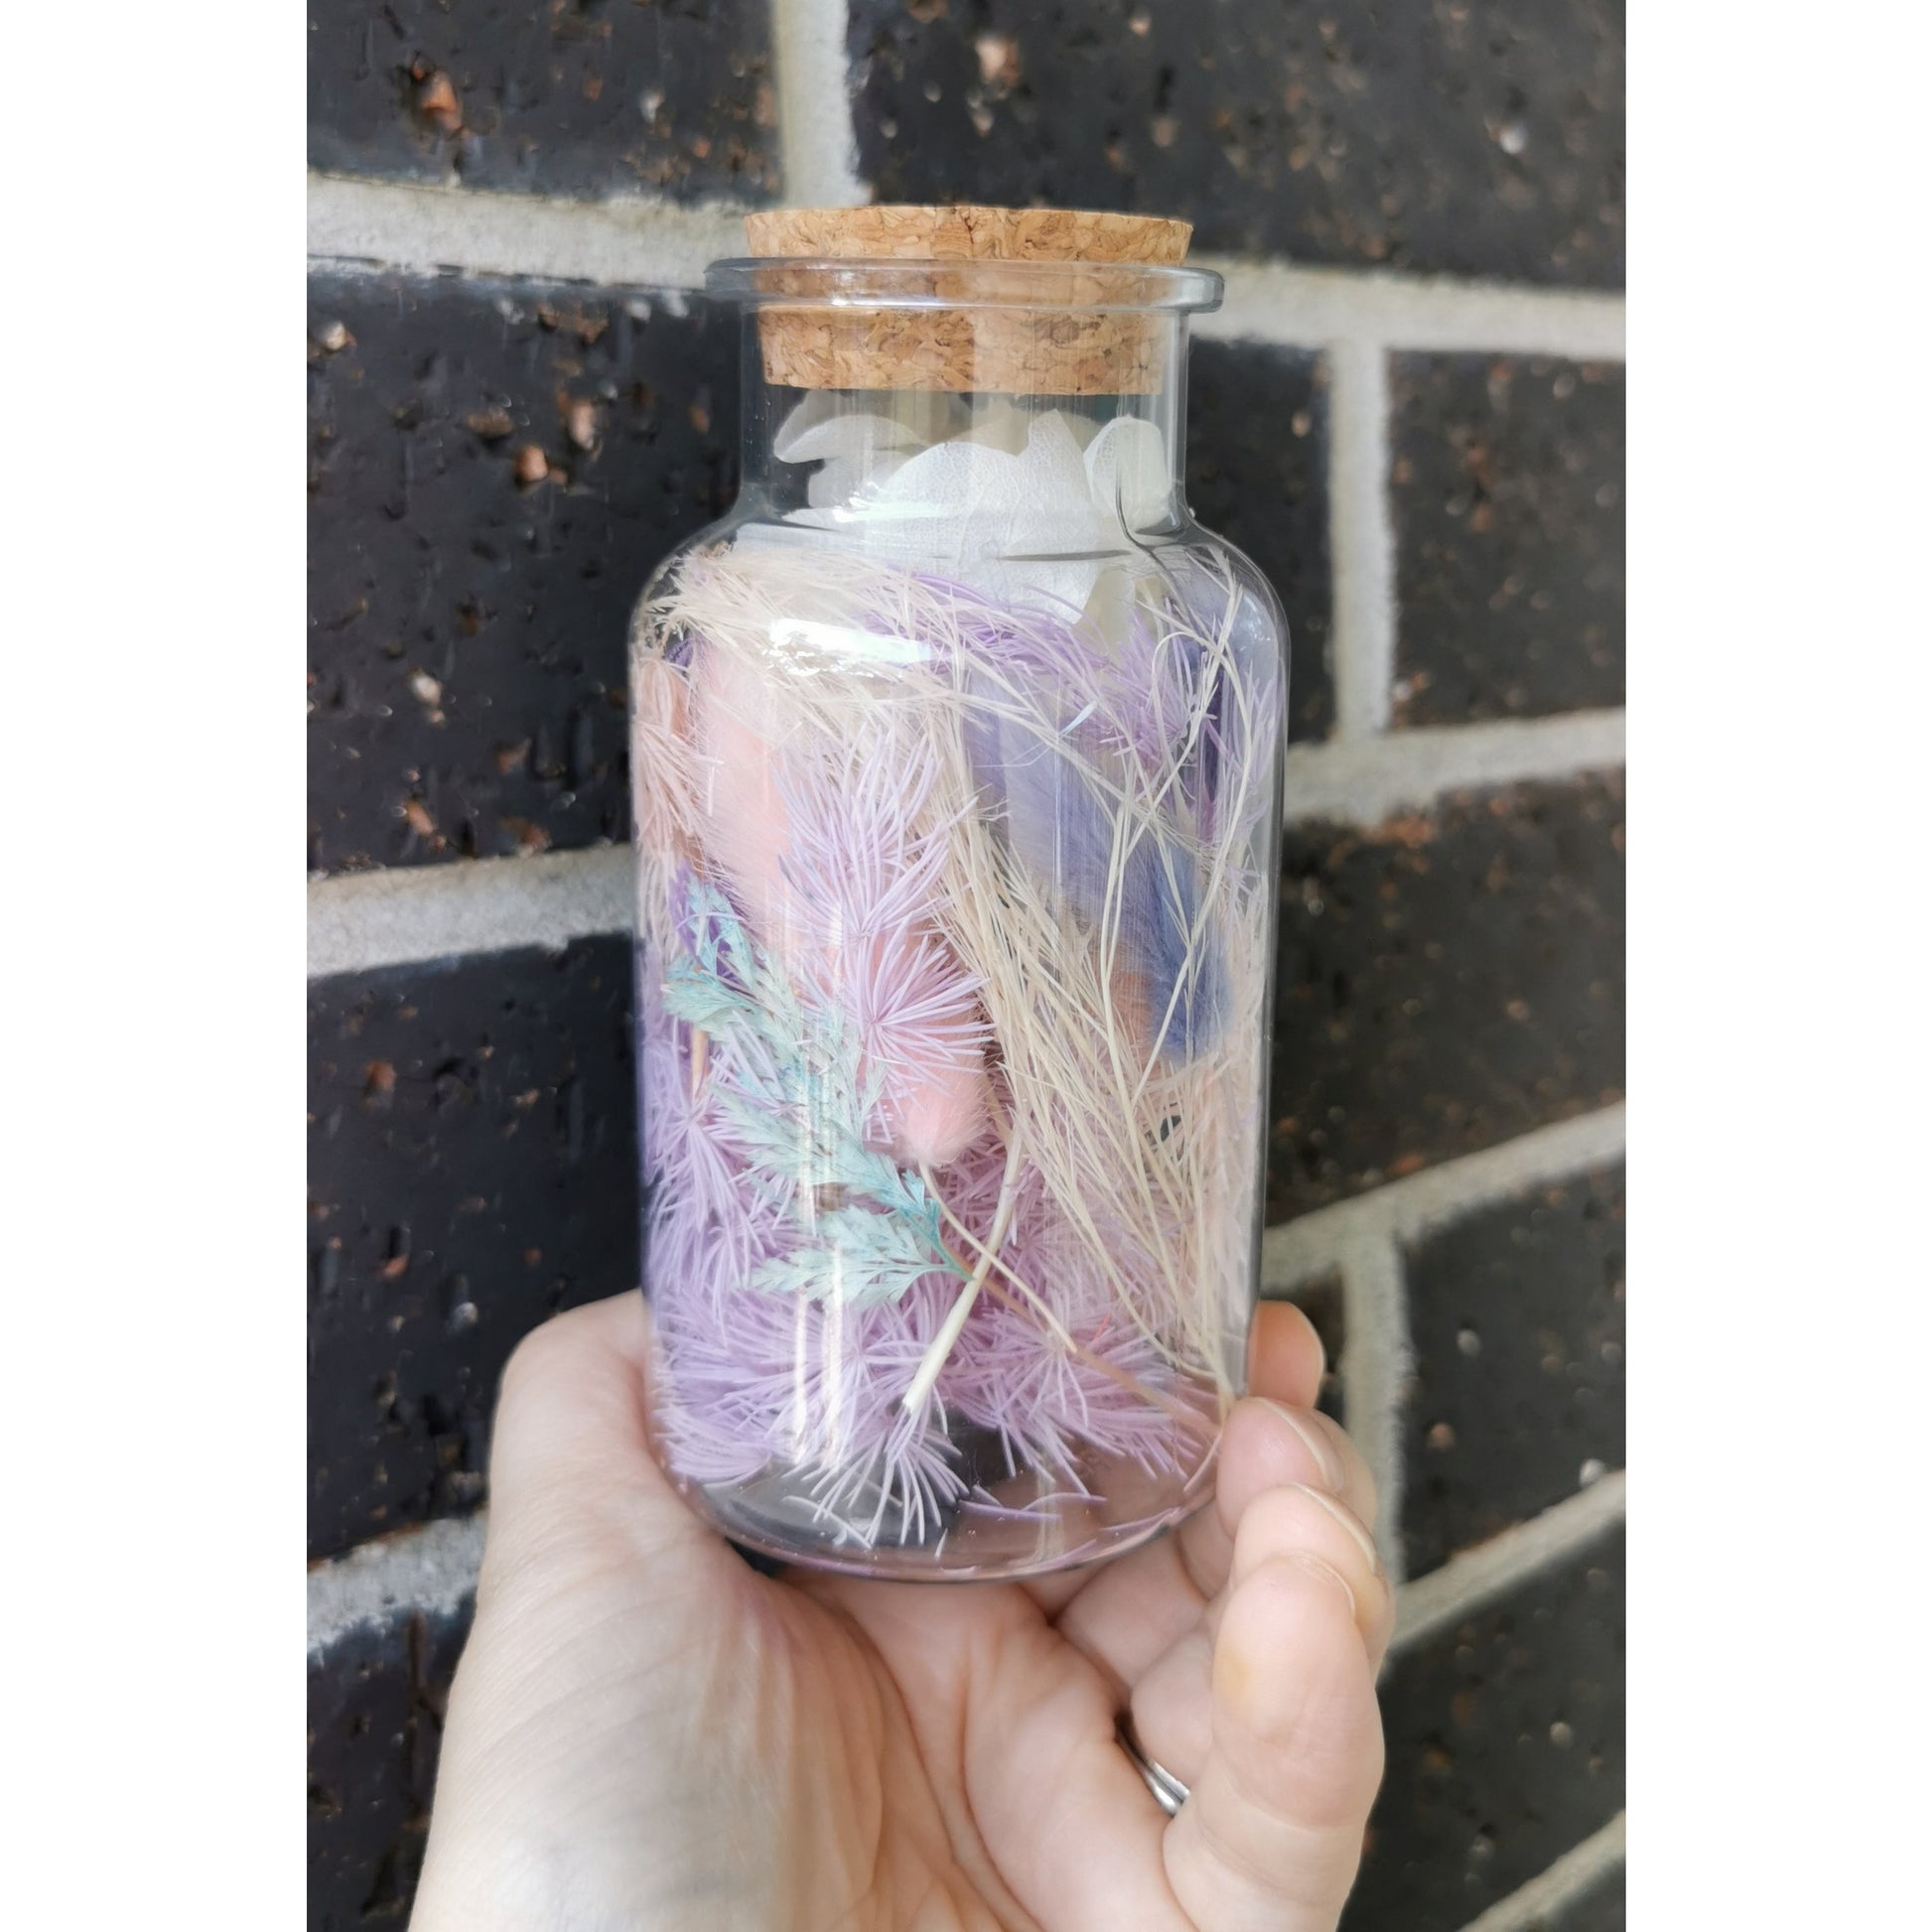 Pastel flower confetti offcuts in a bottle with cork lid